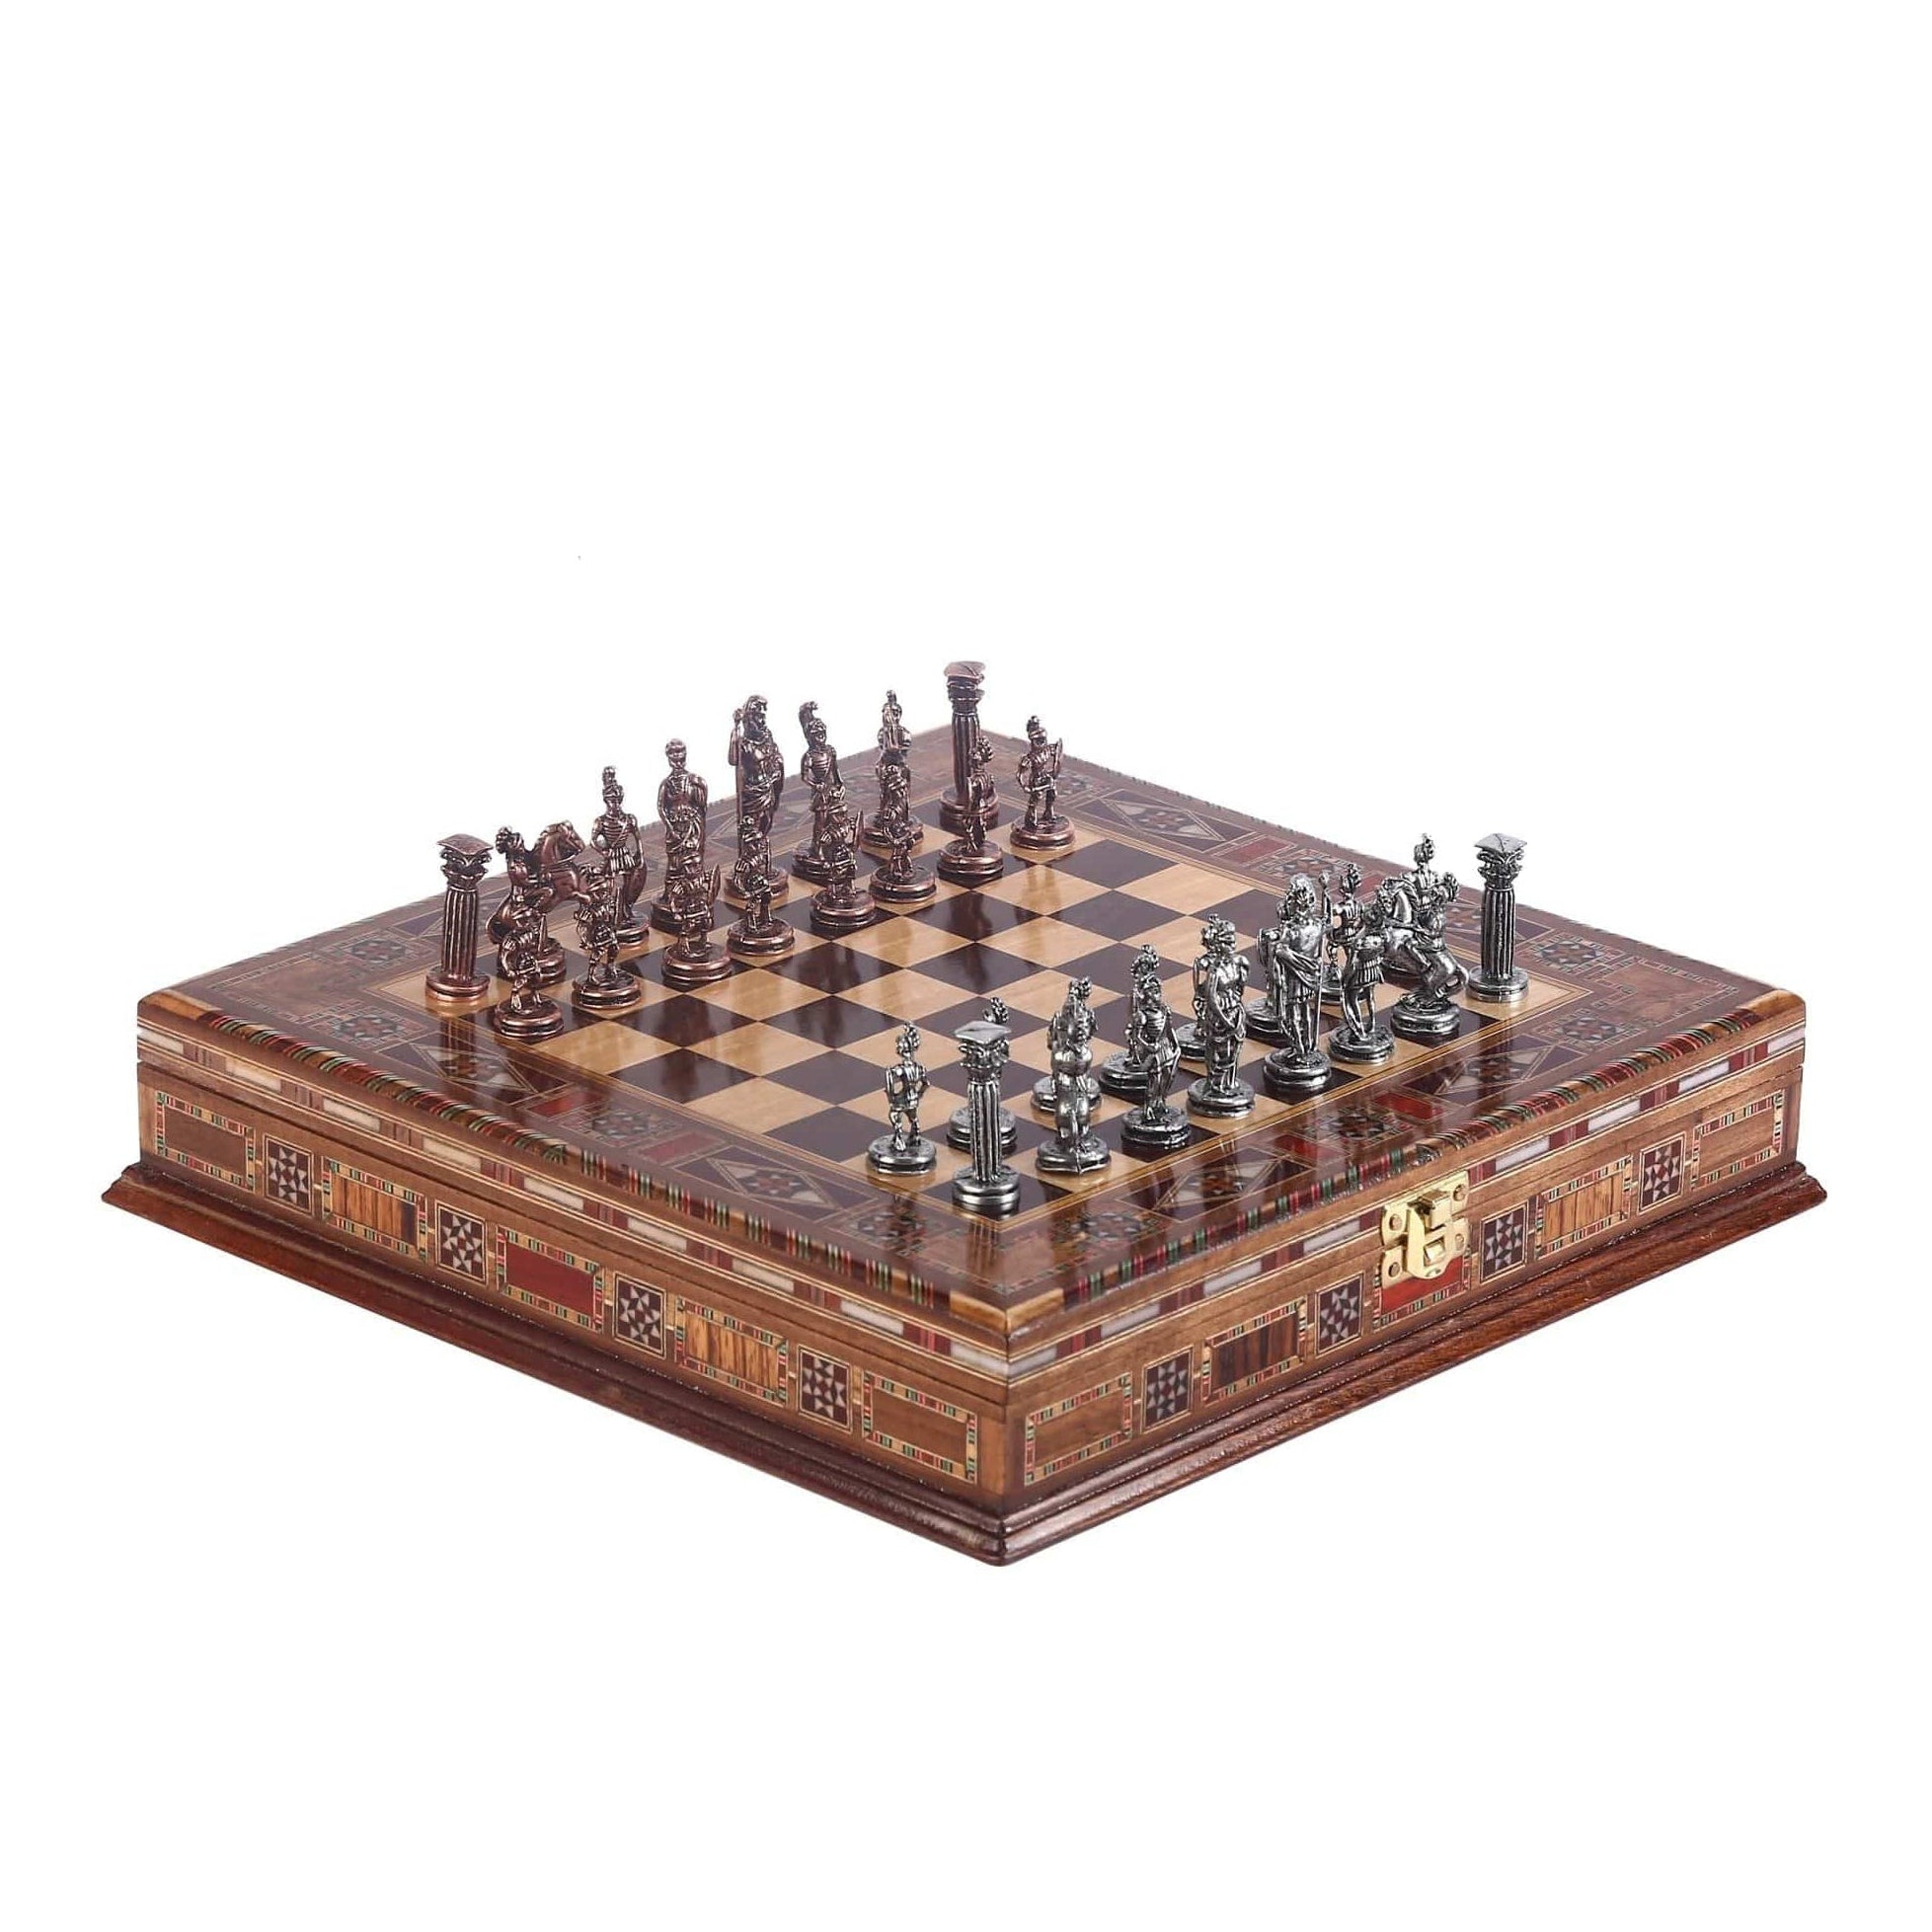 Antique Copper Roman Chess Pieces With Natural Wood Chess Board | Storage In Board | whatagift.com.au.